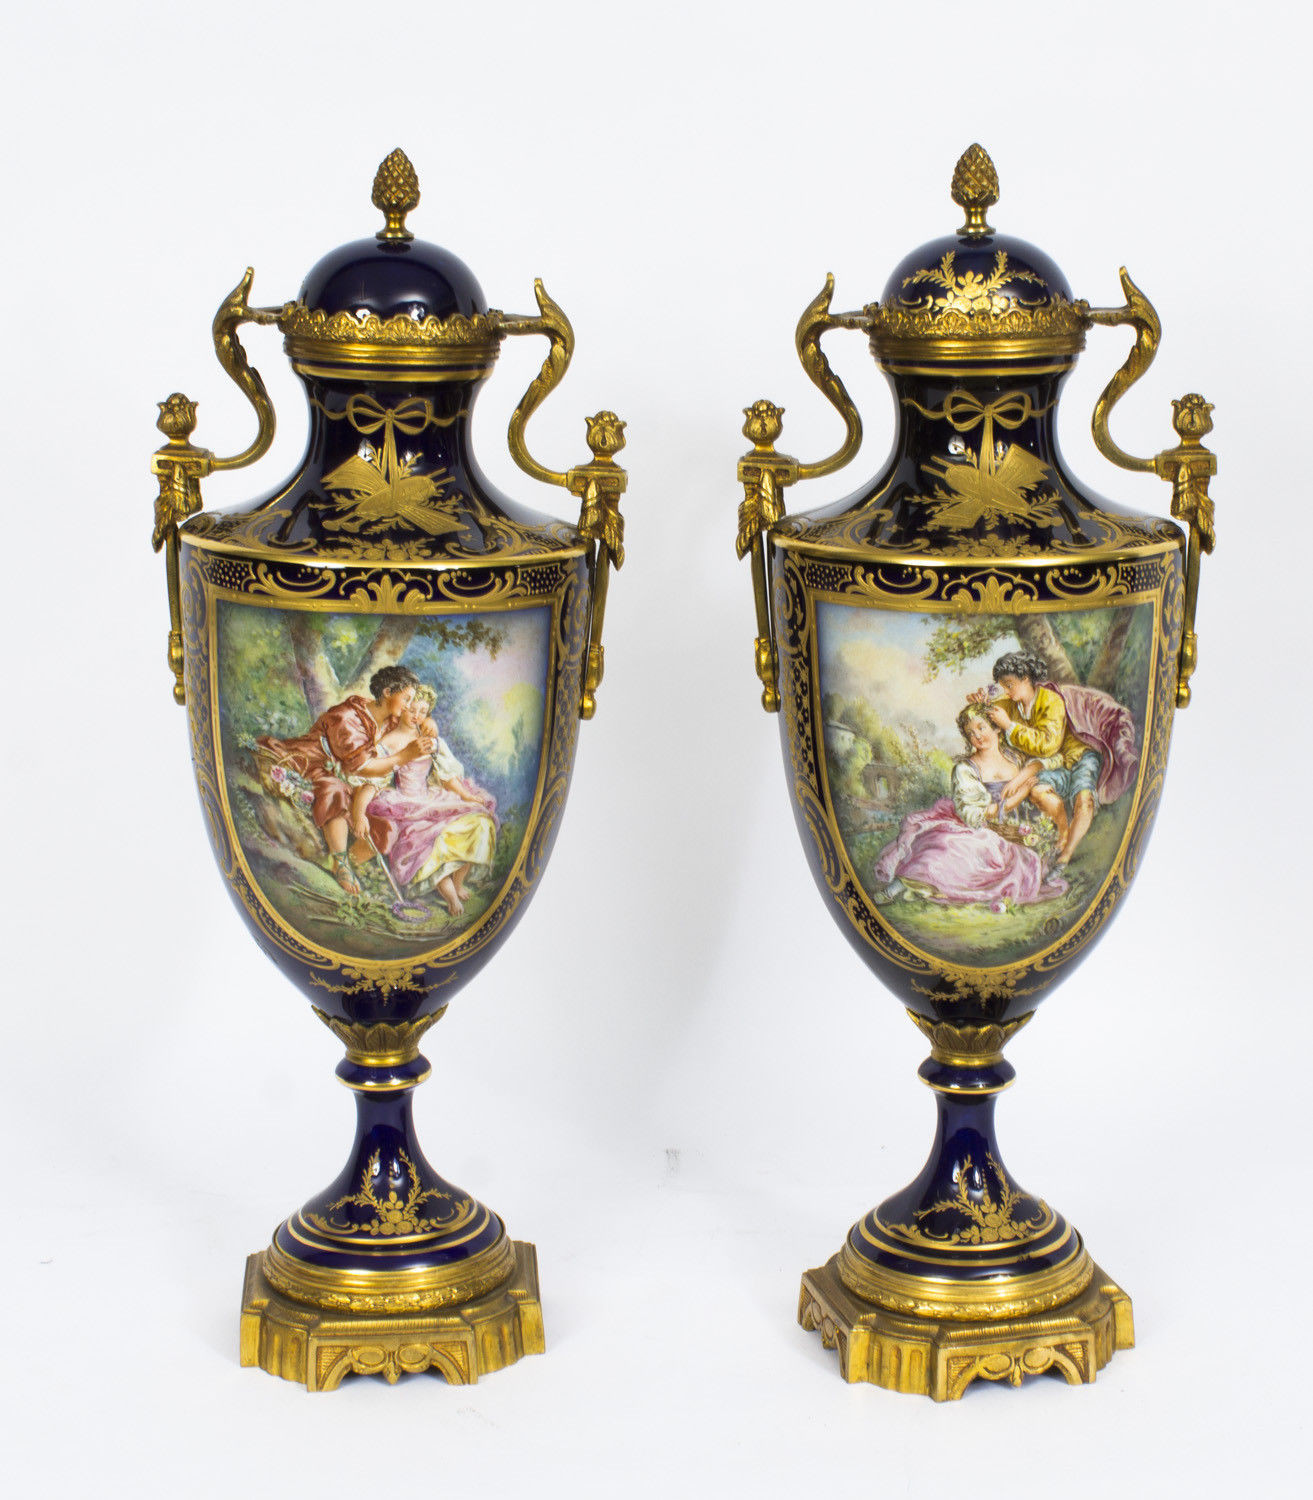 28 Great Pair Of Chinese Cloisonne Vases 2024 free download pair of chinese cloisonne vases of antique pair ormolu mounted sevres style lidded urns vases c1910 intended for antique pair ormolu mounted sevres style lidded urns vases c1910 1 of 1only 1